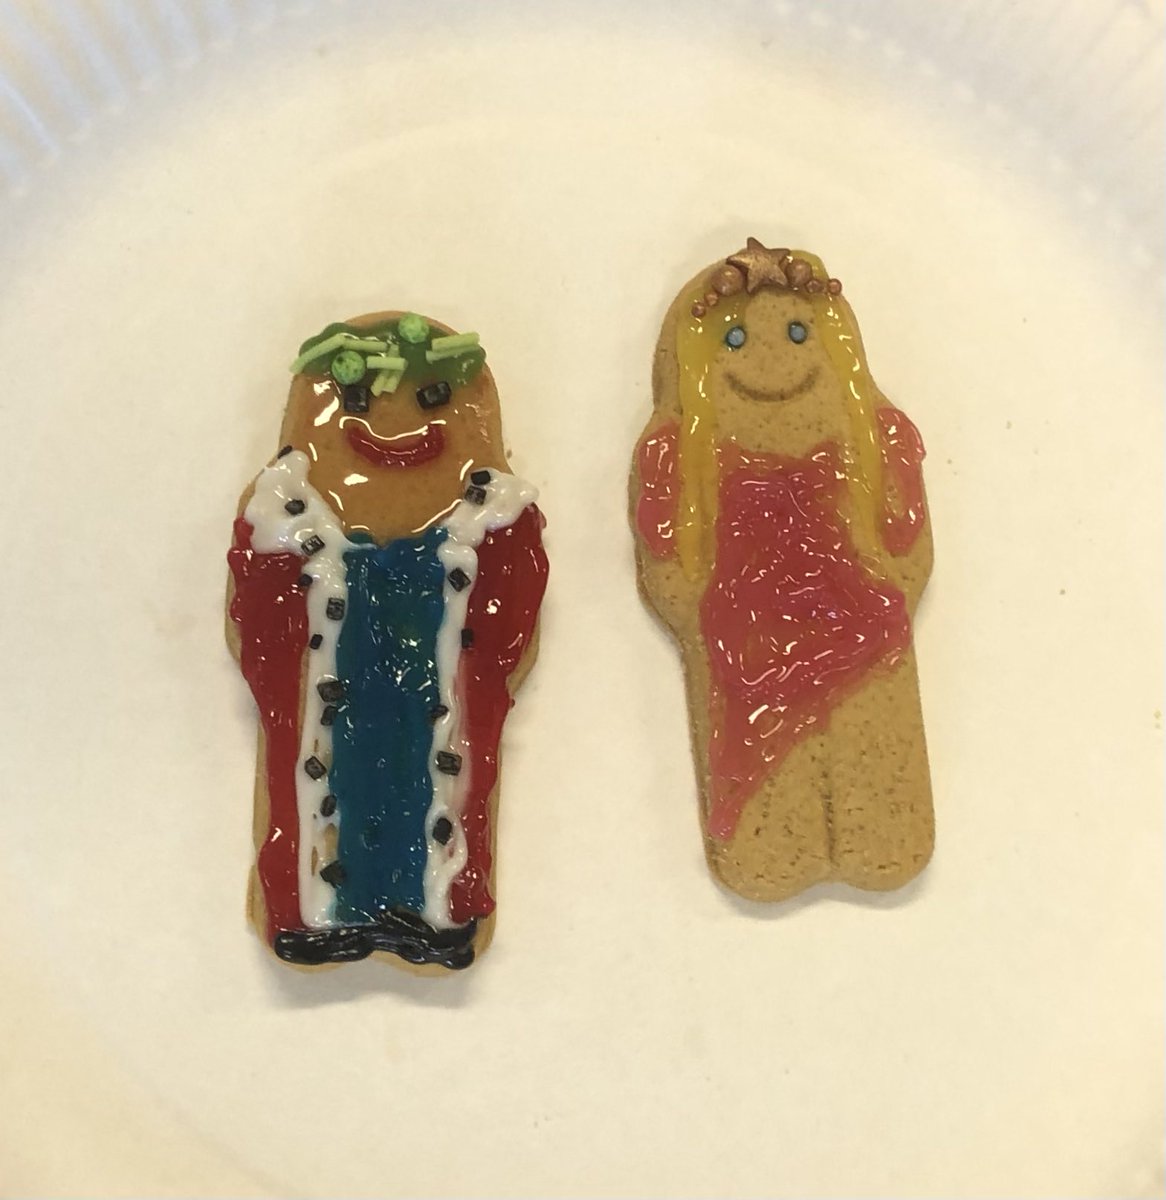 If you’ve read #ReadingLessons, you’ll know that we spend the last lesson of Year 13 recreating characters from our A level set texts though the deeply underrated artistic medium of gingerbread. Here are King Lear and Cordelia, before it all goes wrong. ⁦@FigTreePenguin⁩